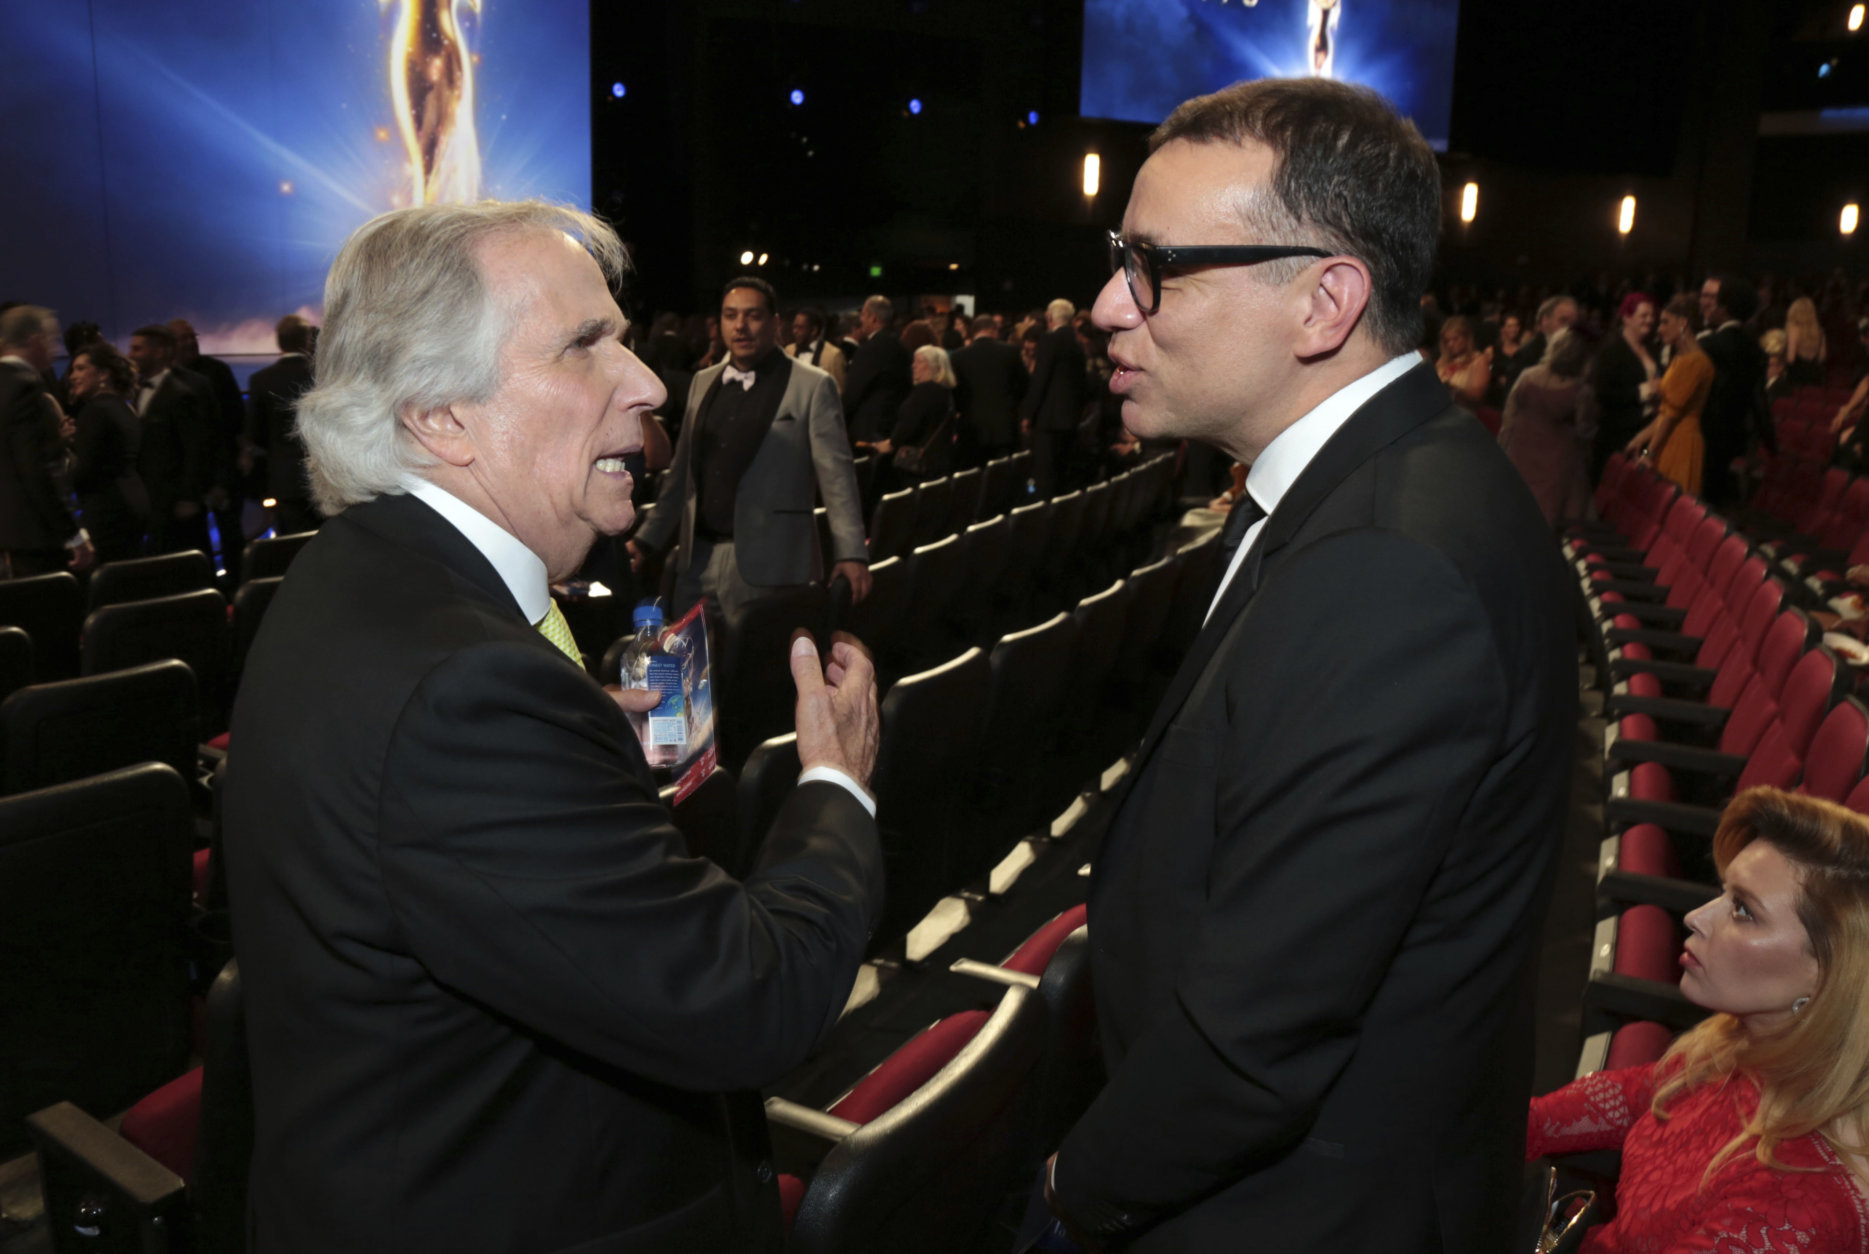 IMAGE DISTRIBUTED FOR THE TELEVISION ACADEMY - Henry Winkler and Fred Armisen at the 70th Primetime Emmy Awards on Monday, Sept. 17, 2018, at the Microsoft Theater in Los Angeles. (Photo by Alex Berliner/Invision for the Television Academy/AP Images)